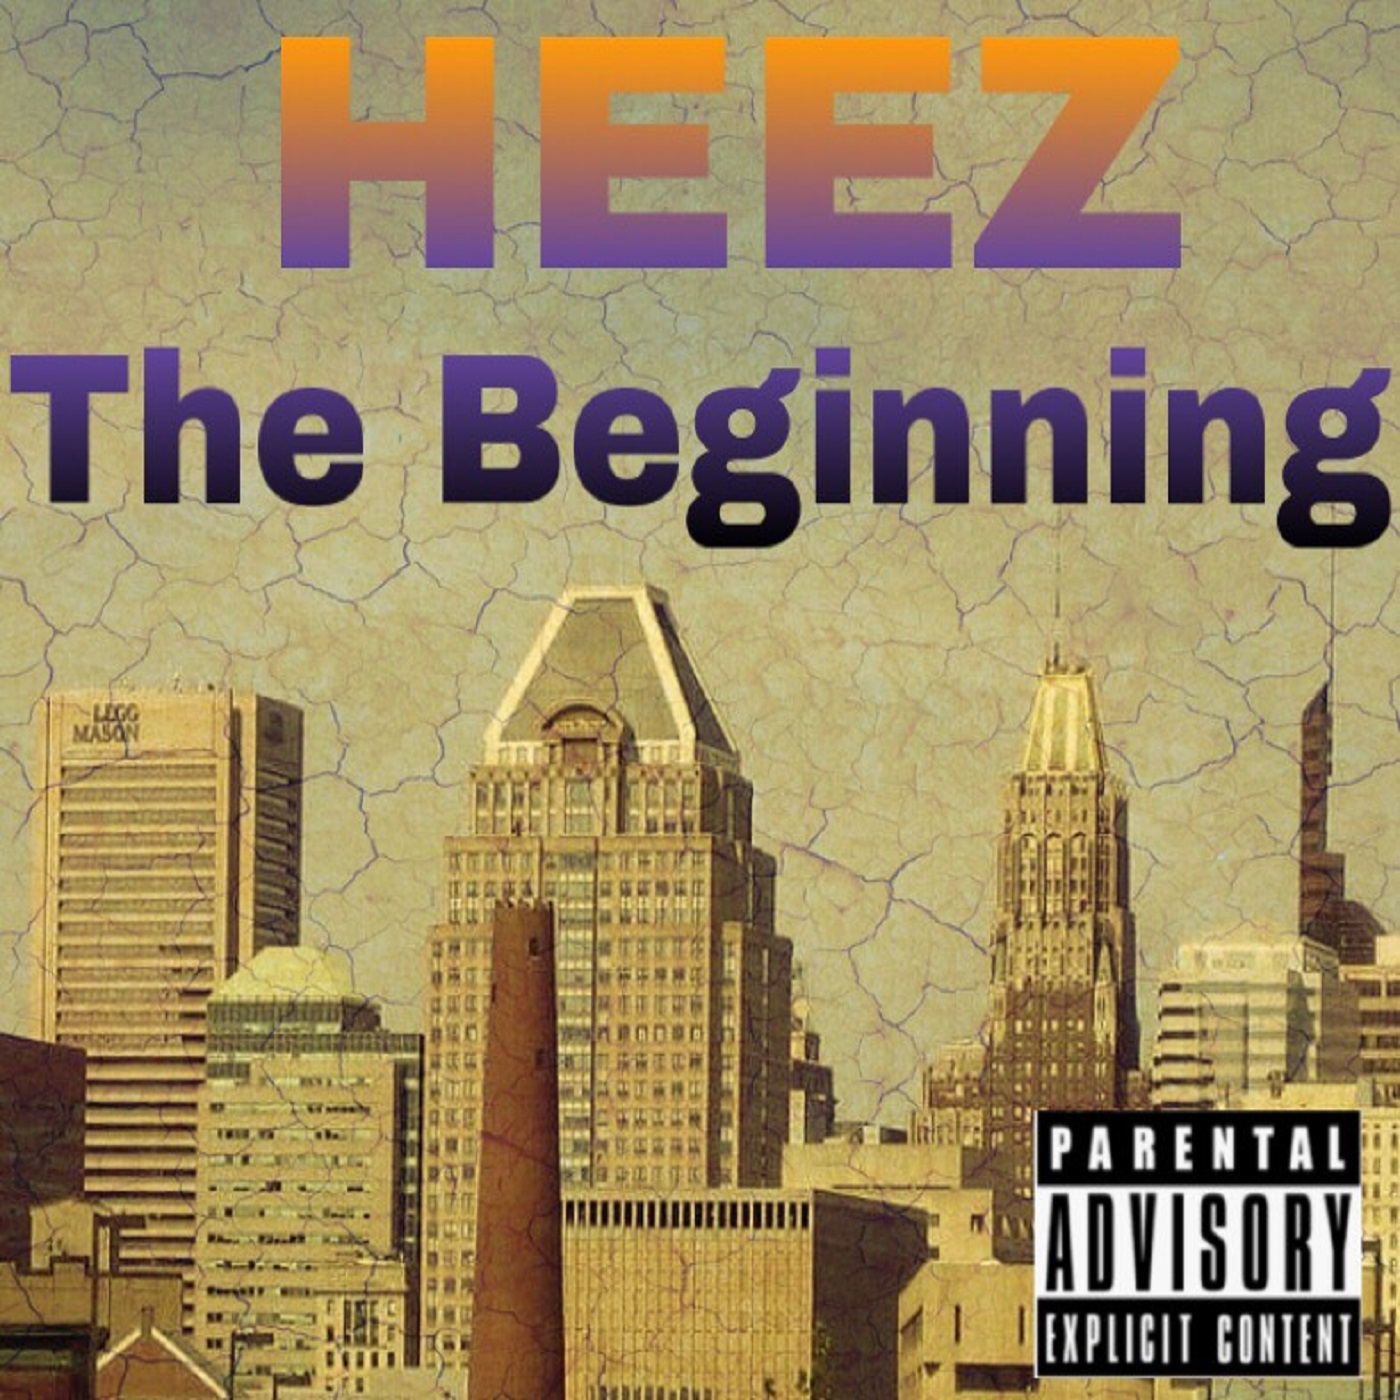 Art for The Beginning by Heez